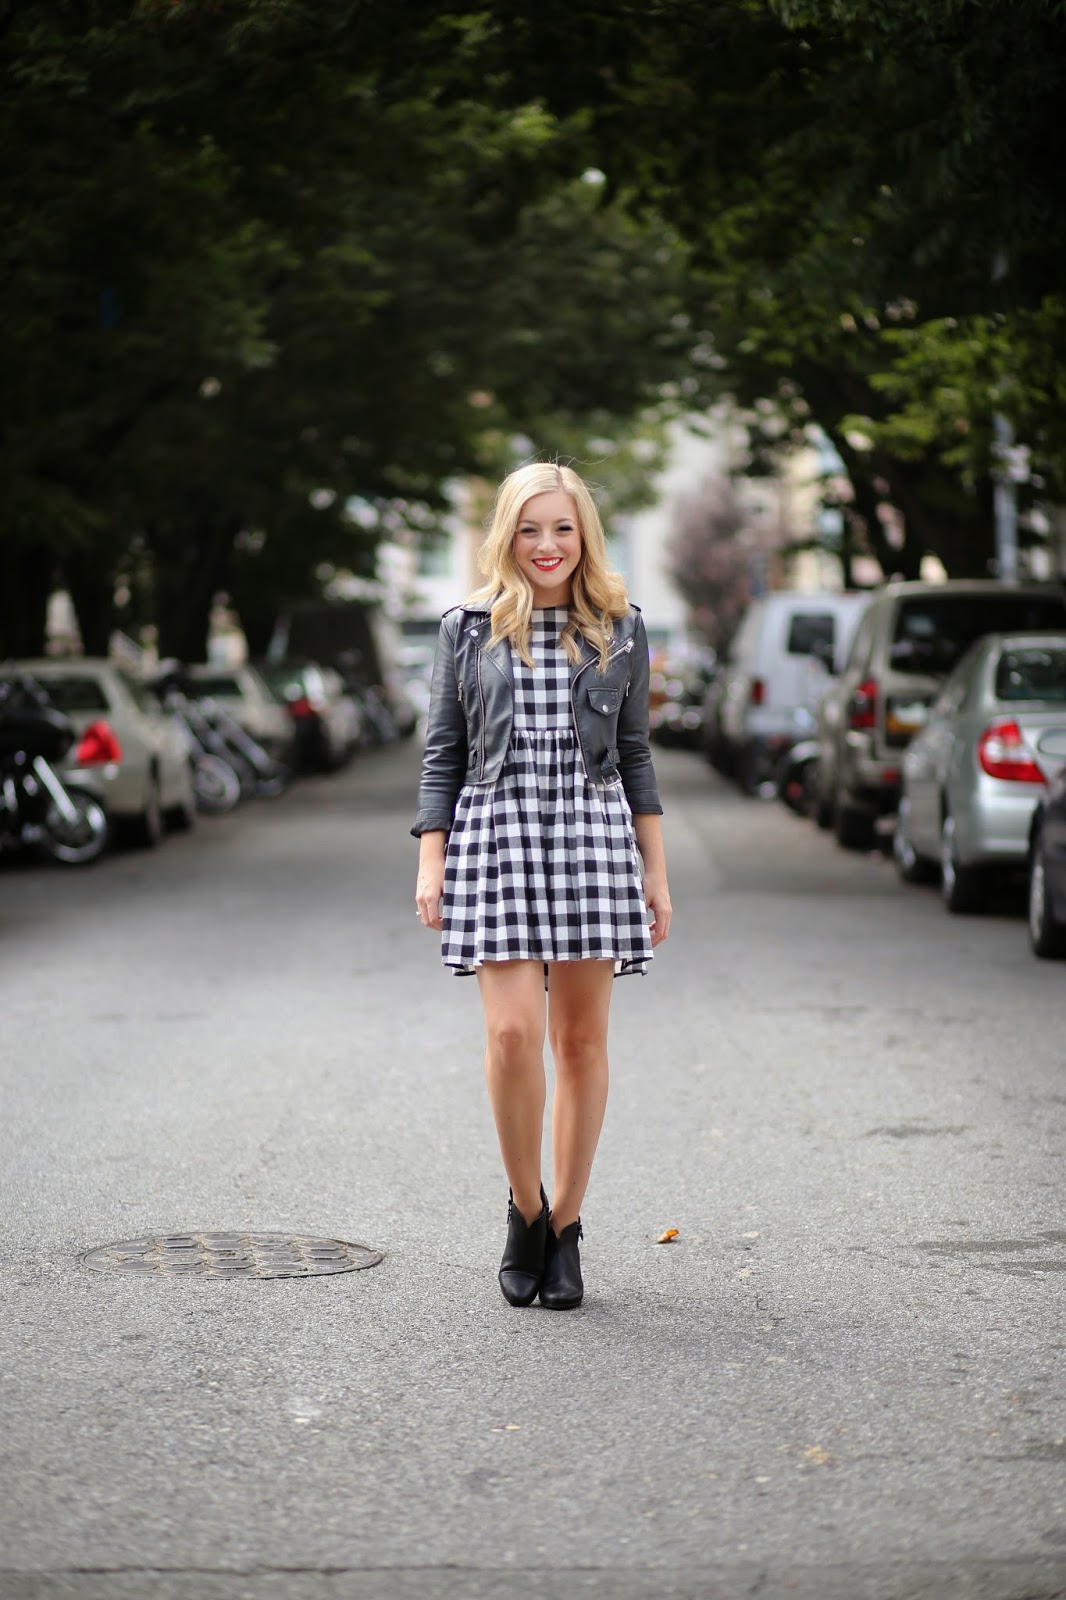 Asos Gingham Smock Dress, Rag and Bone Margot Ankle Boots, Nasty Gal Cropped Leather Jacket